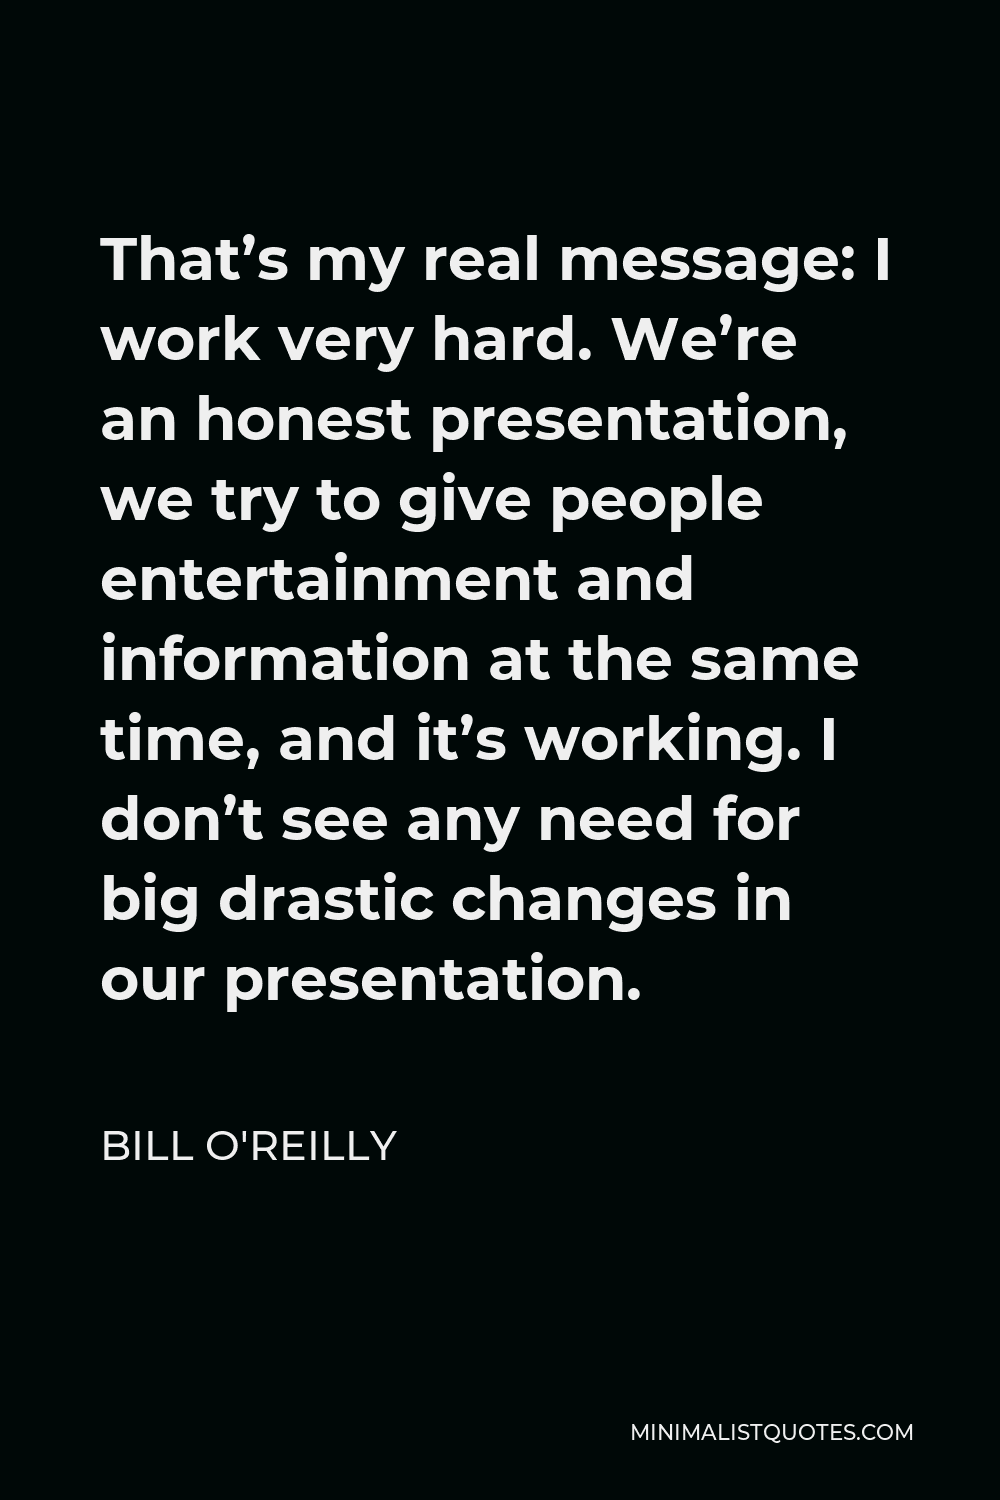 Bill O'Reilly Quote - That’s my real message: I work very hard. We’re an honest presentation, we try to give people entertainment and information at the same time, and it’s working. I don’t see any need for big drastic changes in our presentation.